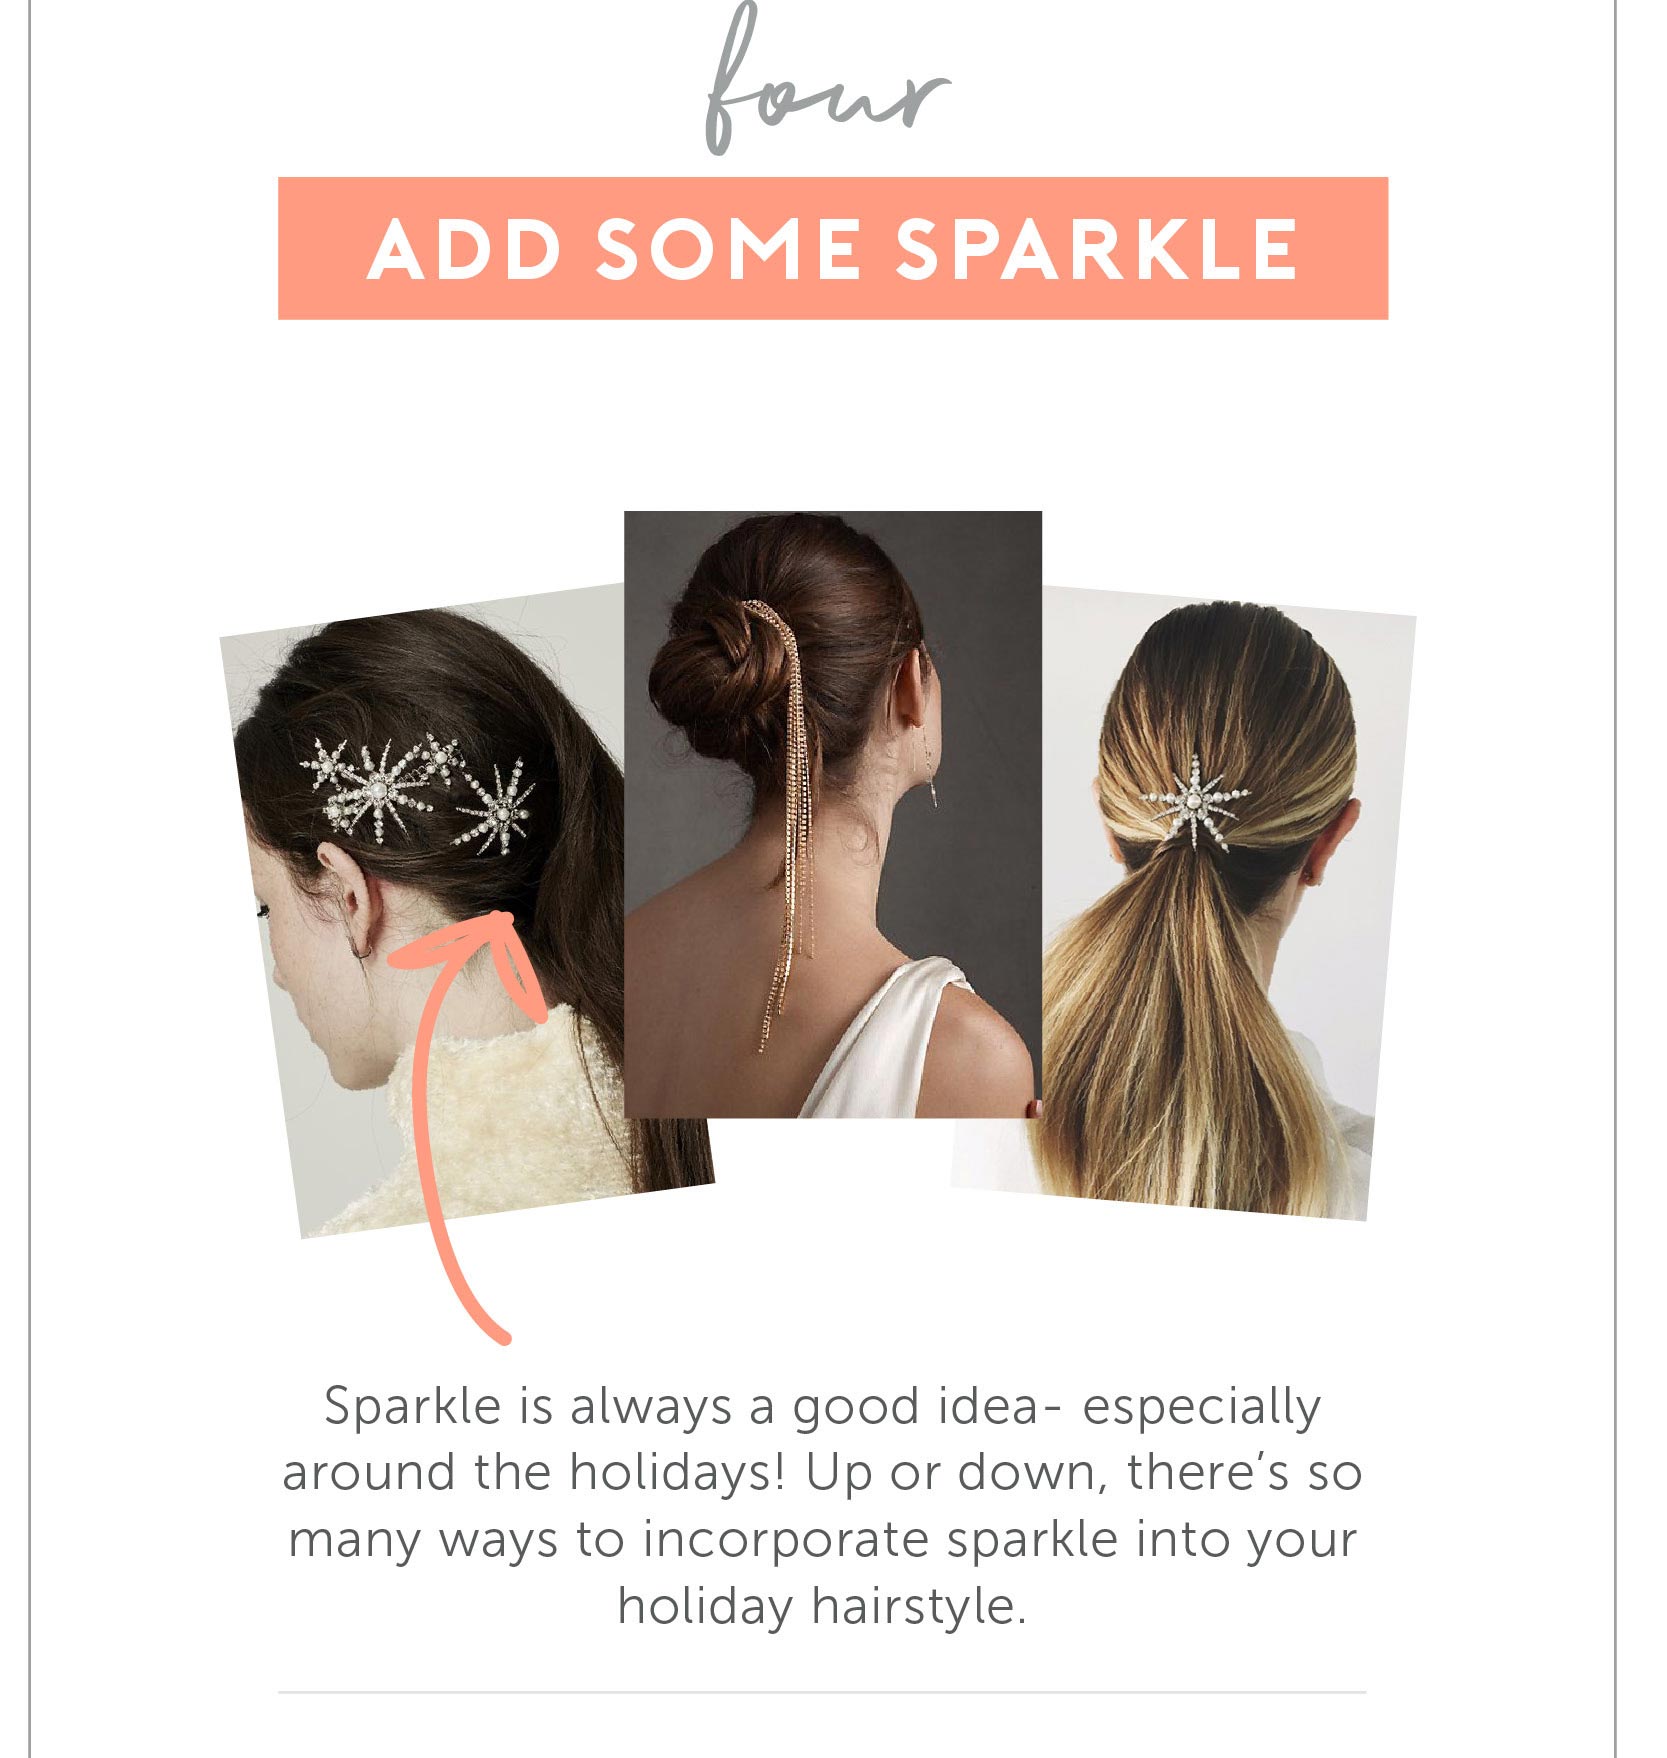 Add Some Sparkle Sparkle is always a good idea- especially around the holidays! Up or down, there’s so many ways to incorporate sparkle into your holiday hairstyle.